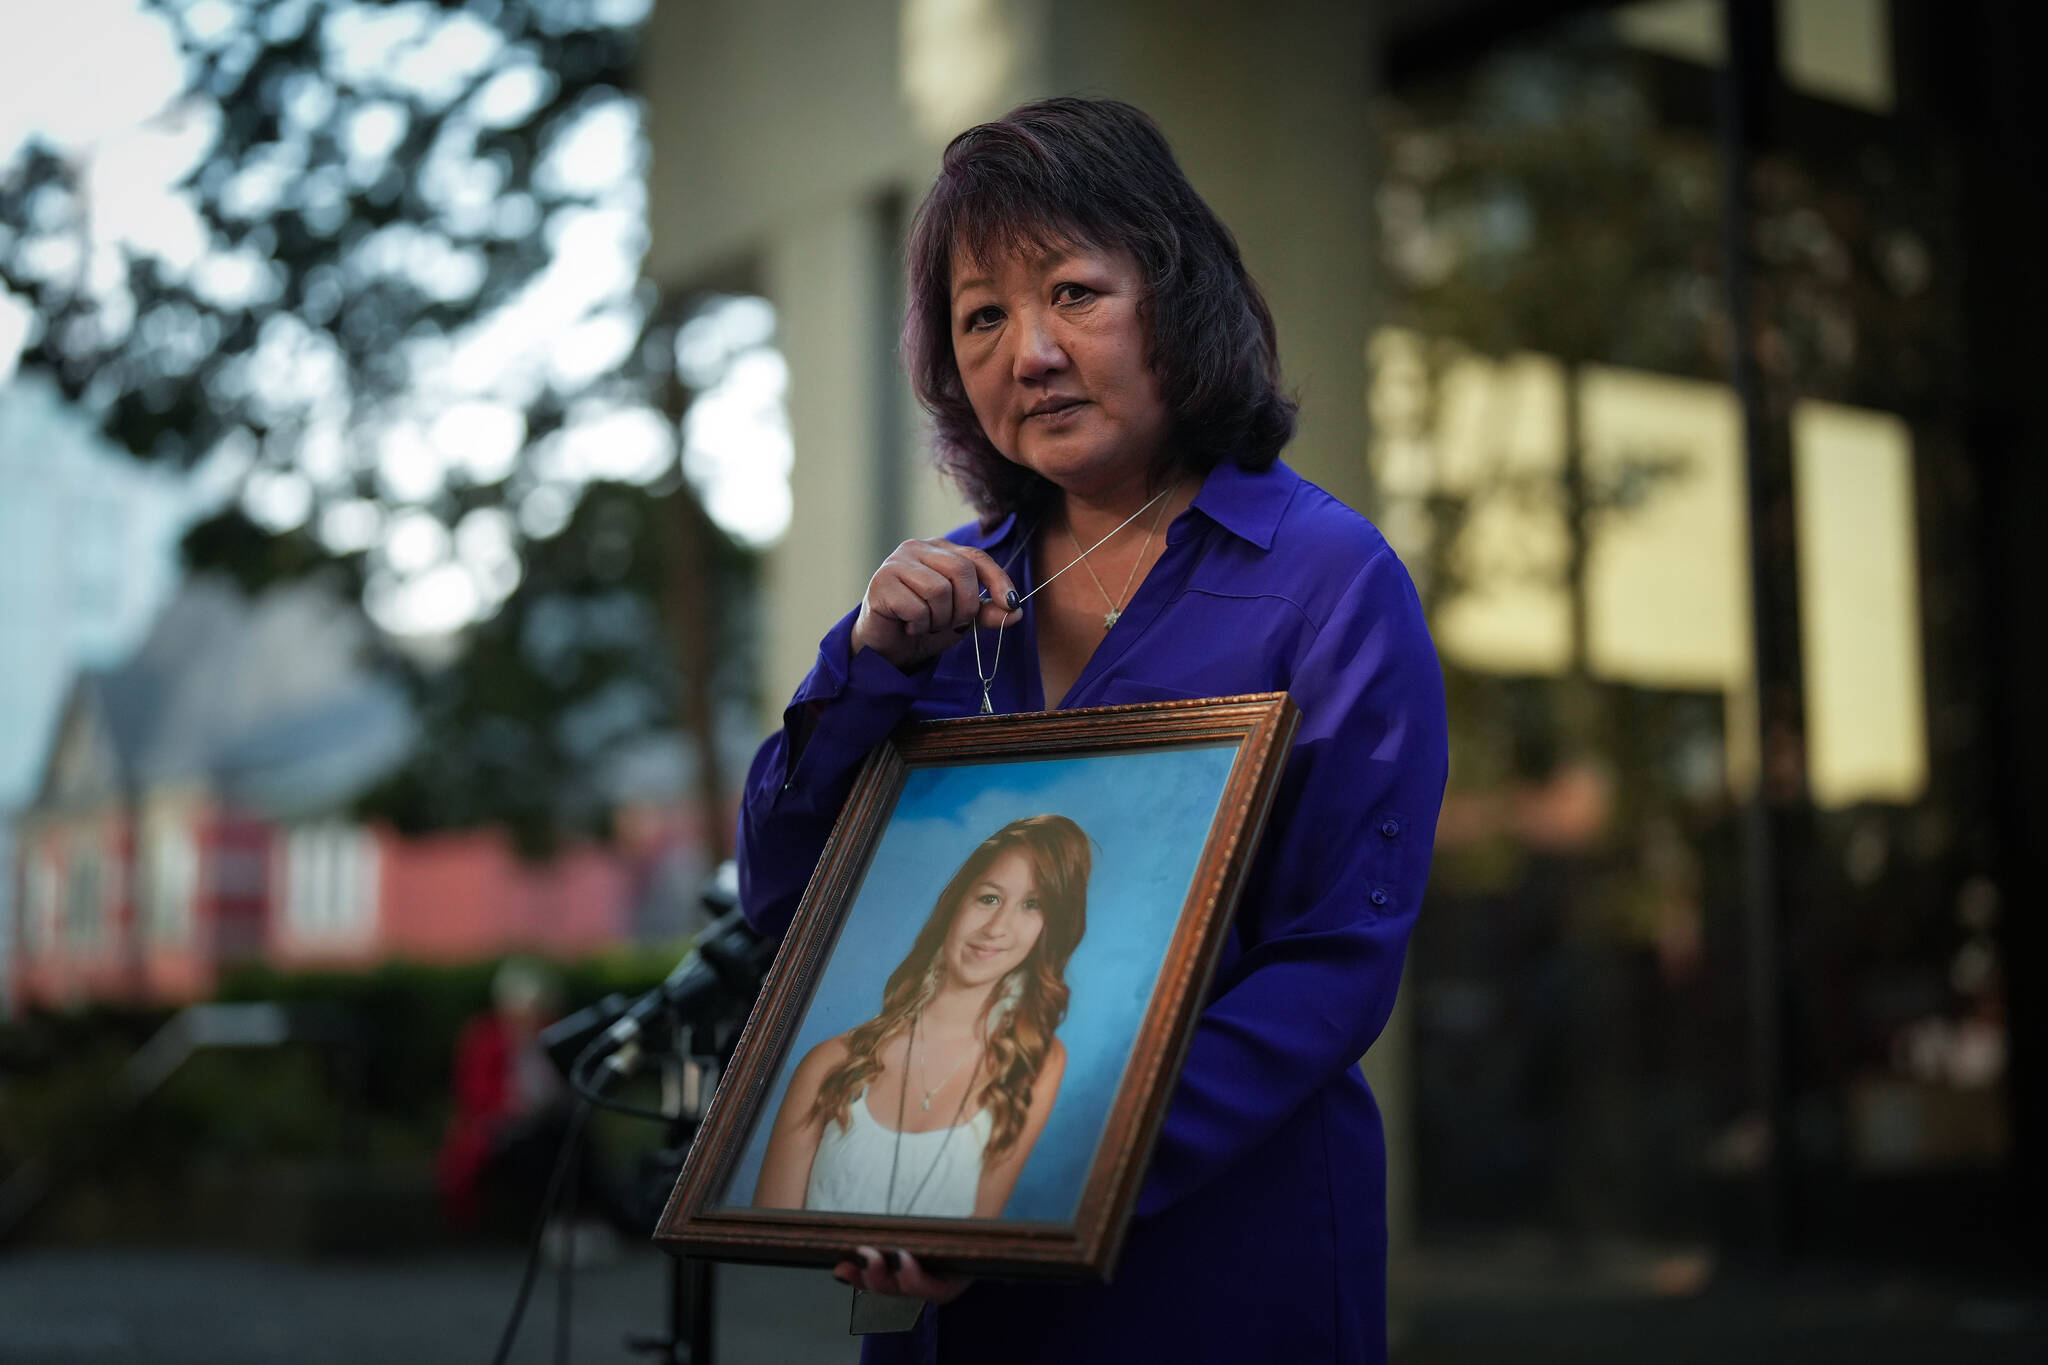 Carol Todd holds a photo of her late teenage daughter Amanda Todd, who died by suicide in 2012, and the necklace she was wearing in the school photo, outside B.C. Supreme Court after sentencing for the Dutch man who was accused of extorting and harassing her daughter, in New Westminster, B.C., on Friday, October 14, 2022. Todd said she had kept the necklace and “A” pendant stored away since her death and took it out for the first time in a decade to wear it to the sentencing. A British Columbia judge has sentenced Aydin Coban to 13 years in prison for tormenting Amanda Todd before she died by suicide. THE CANADIAN PRESS/Darryl Dyck